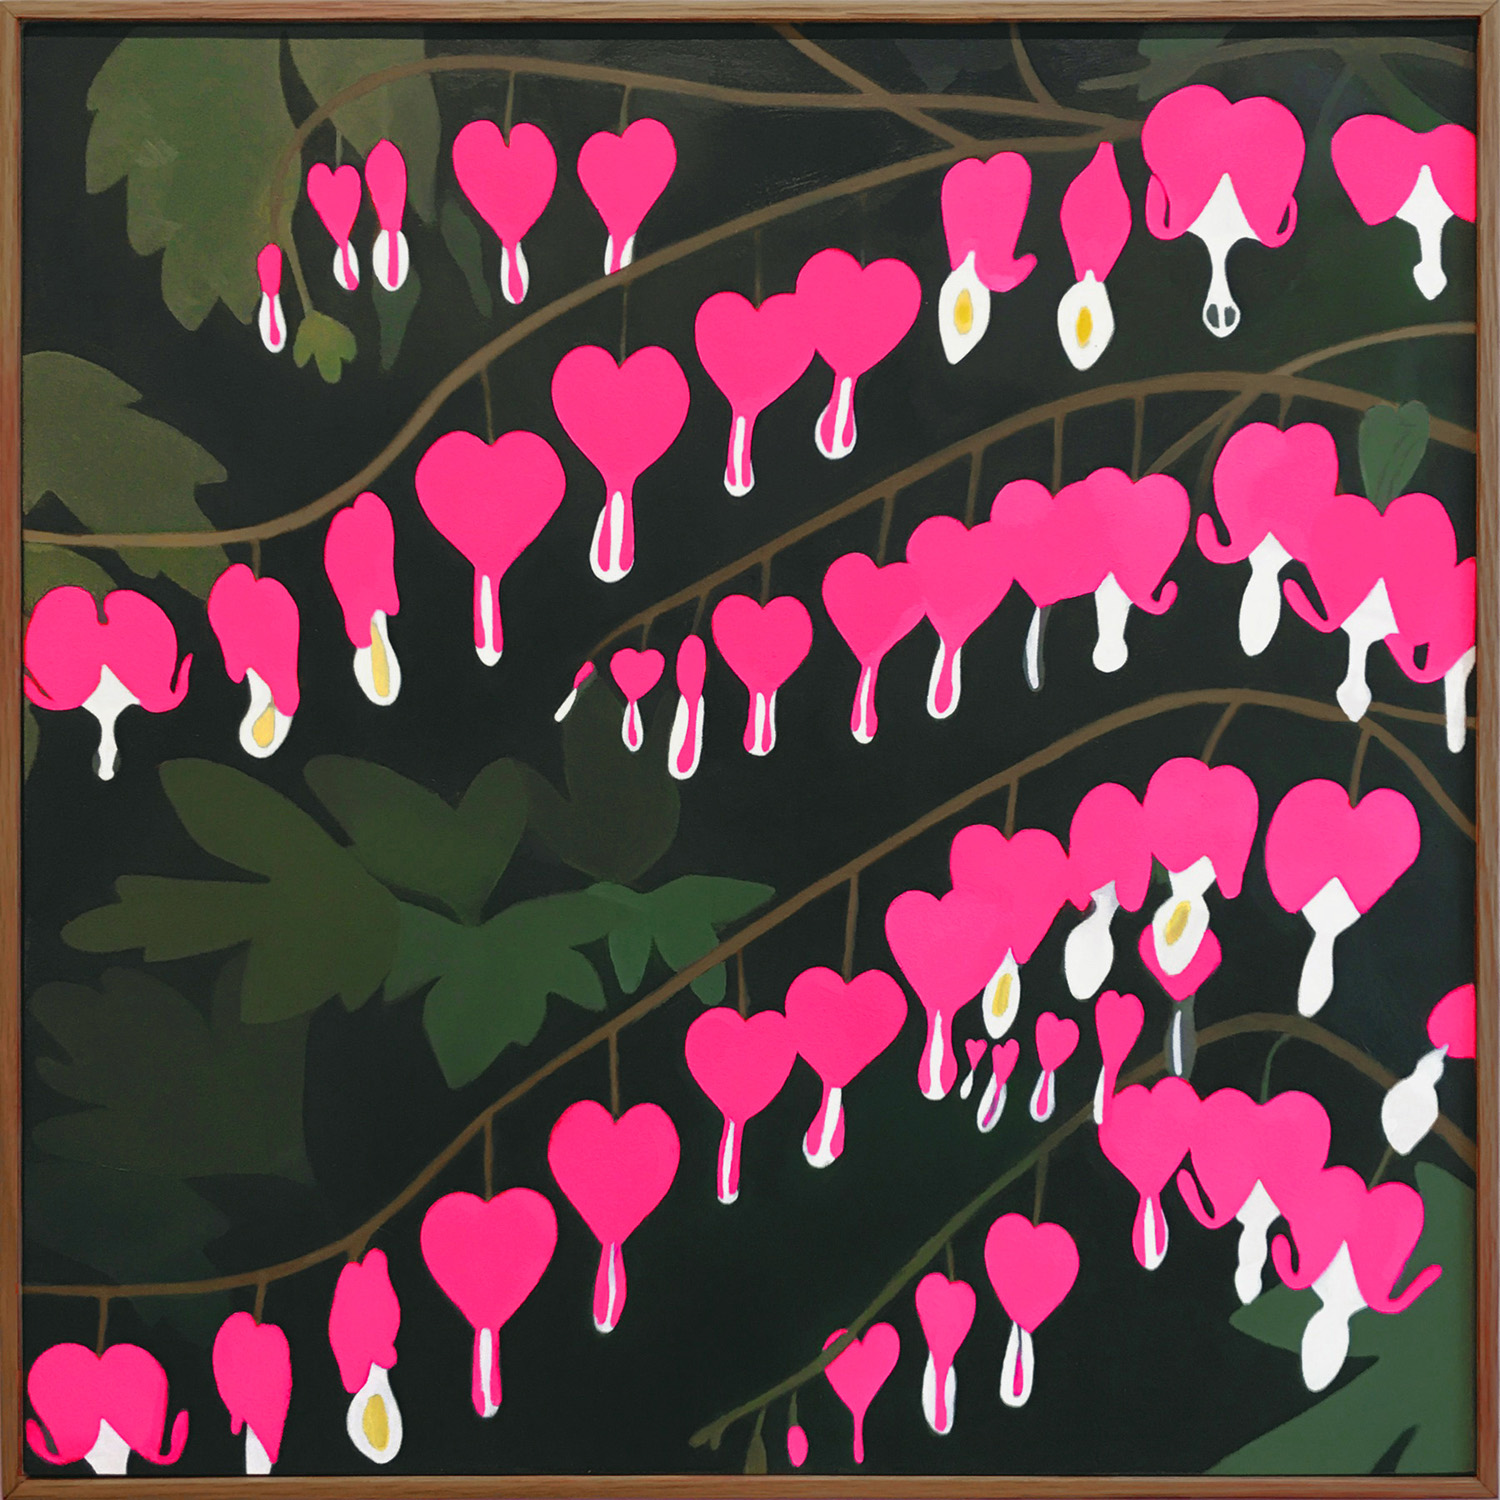 LATE BLOOMER SOLO SHOW Bleeding Hearts Pink